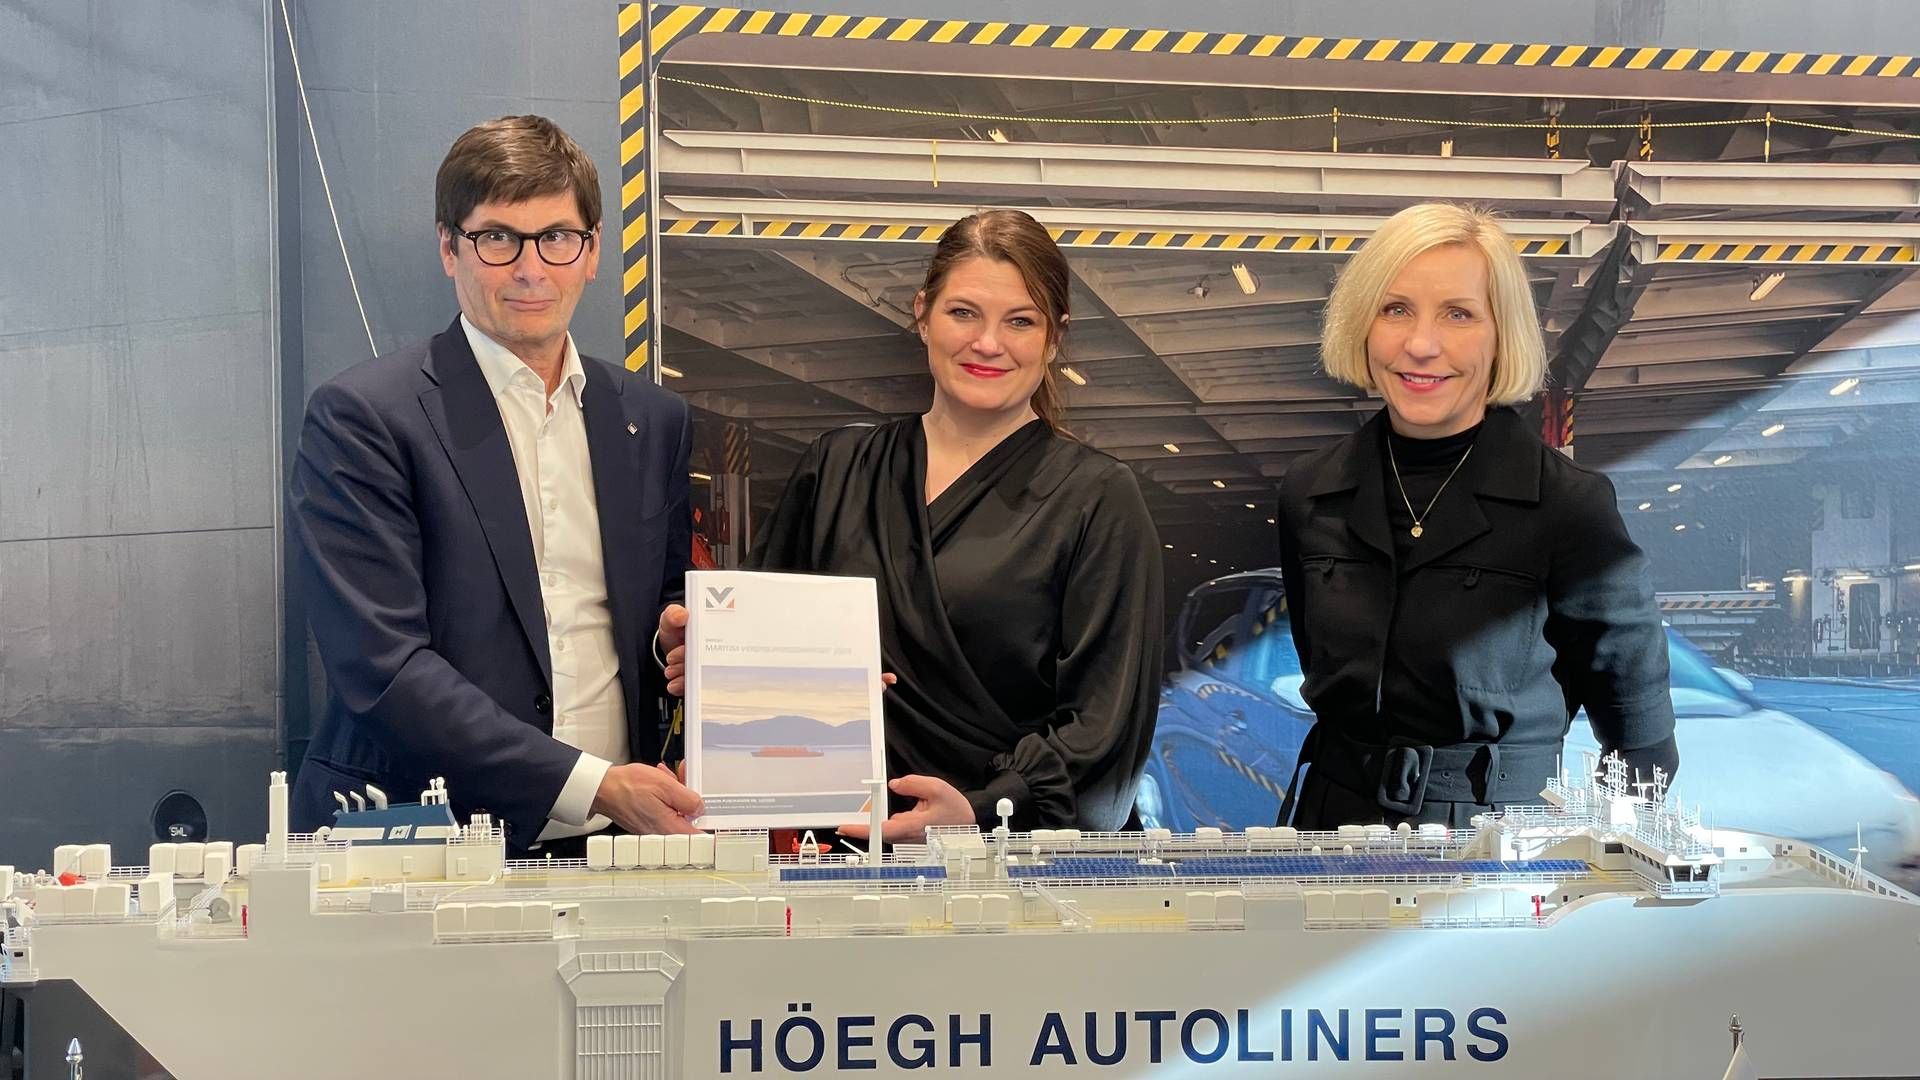 From left: Even Aas, chairman of the board of the Maritime Forum, Cecilie Myrseth, minister for fisheries and oceans, and Lise Duetoft, head of strategy and analysis at Höegh Autoliners. | Photo: Idha Toft Valeur